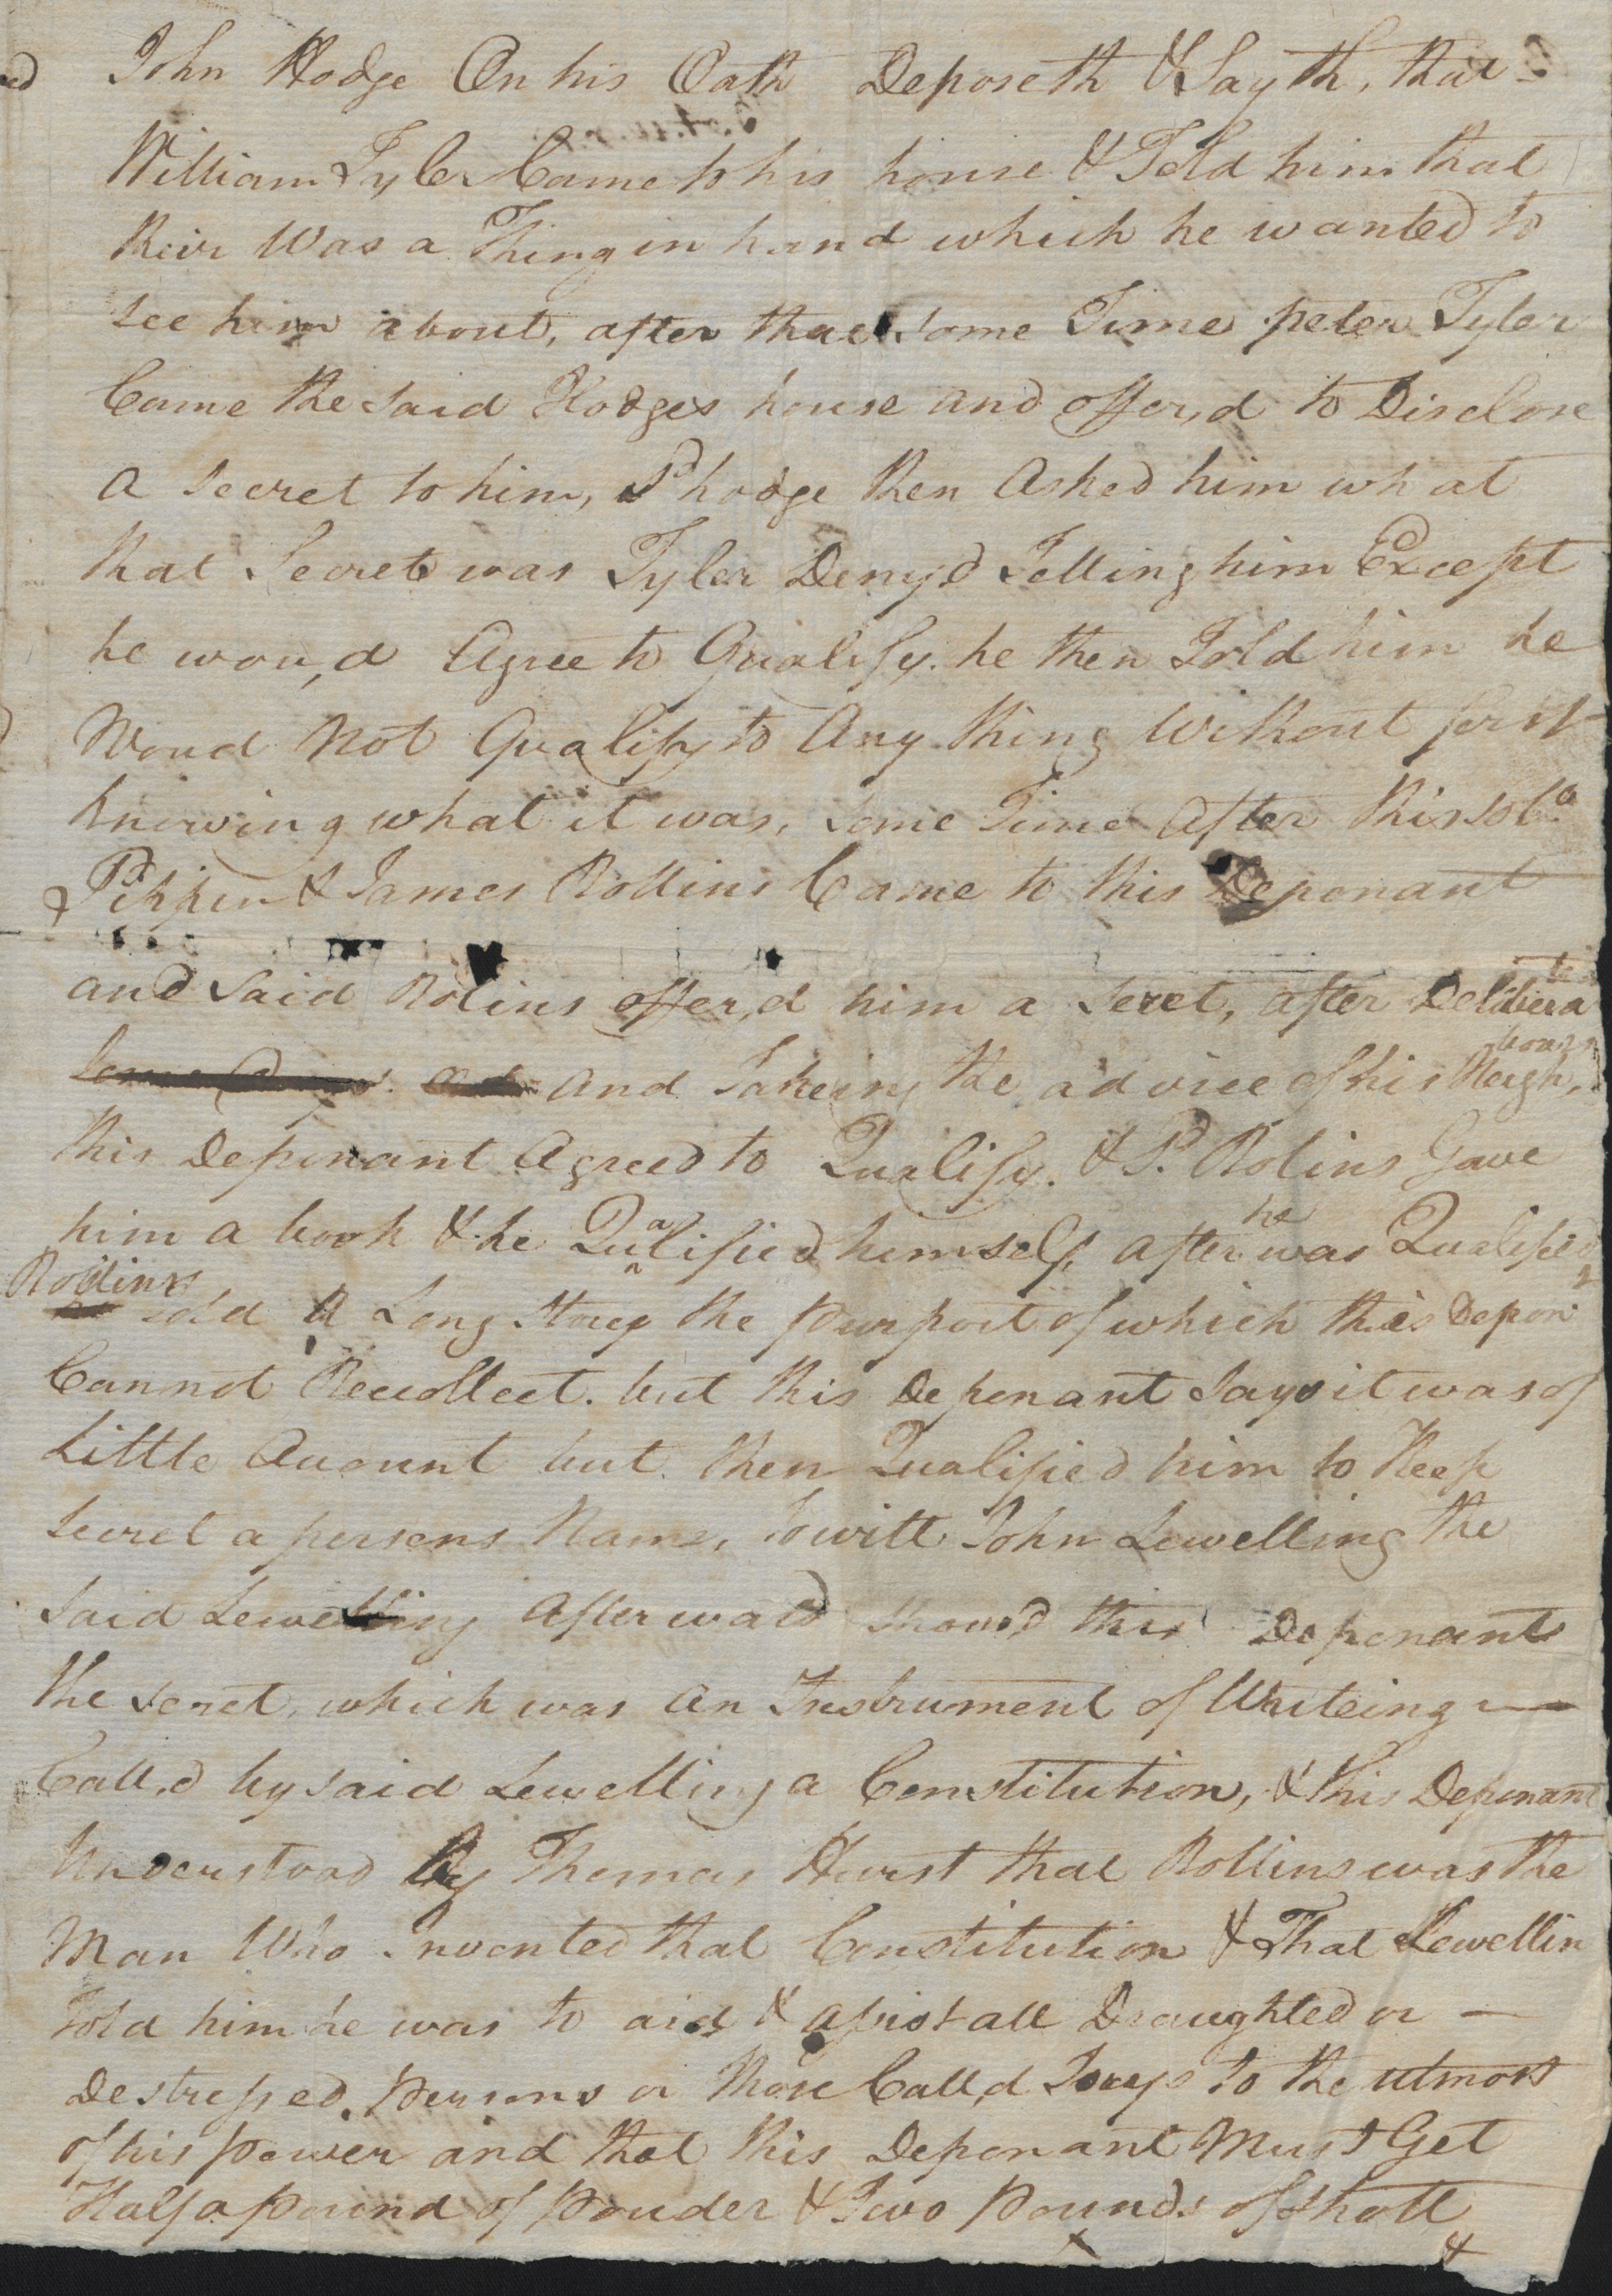 Deposition of John Hodge, 4 July 1777, page 1